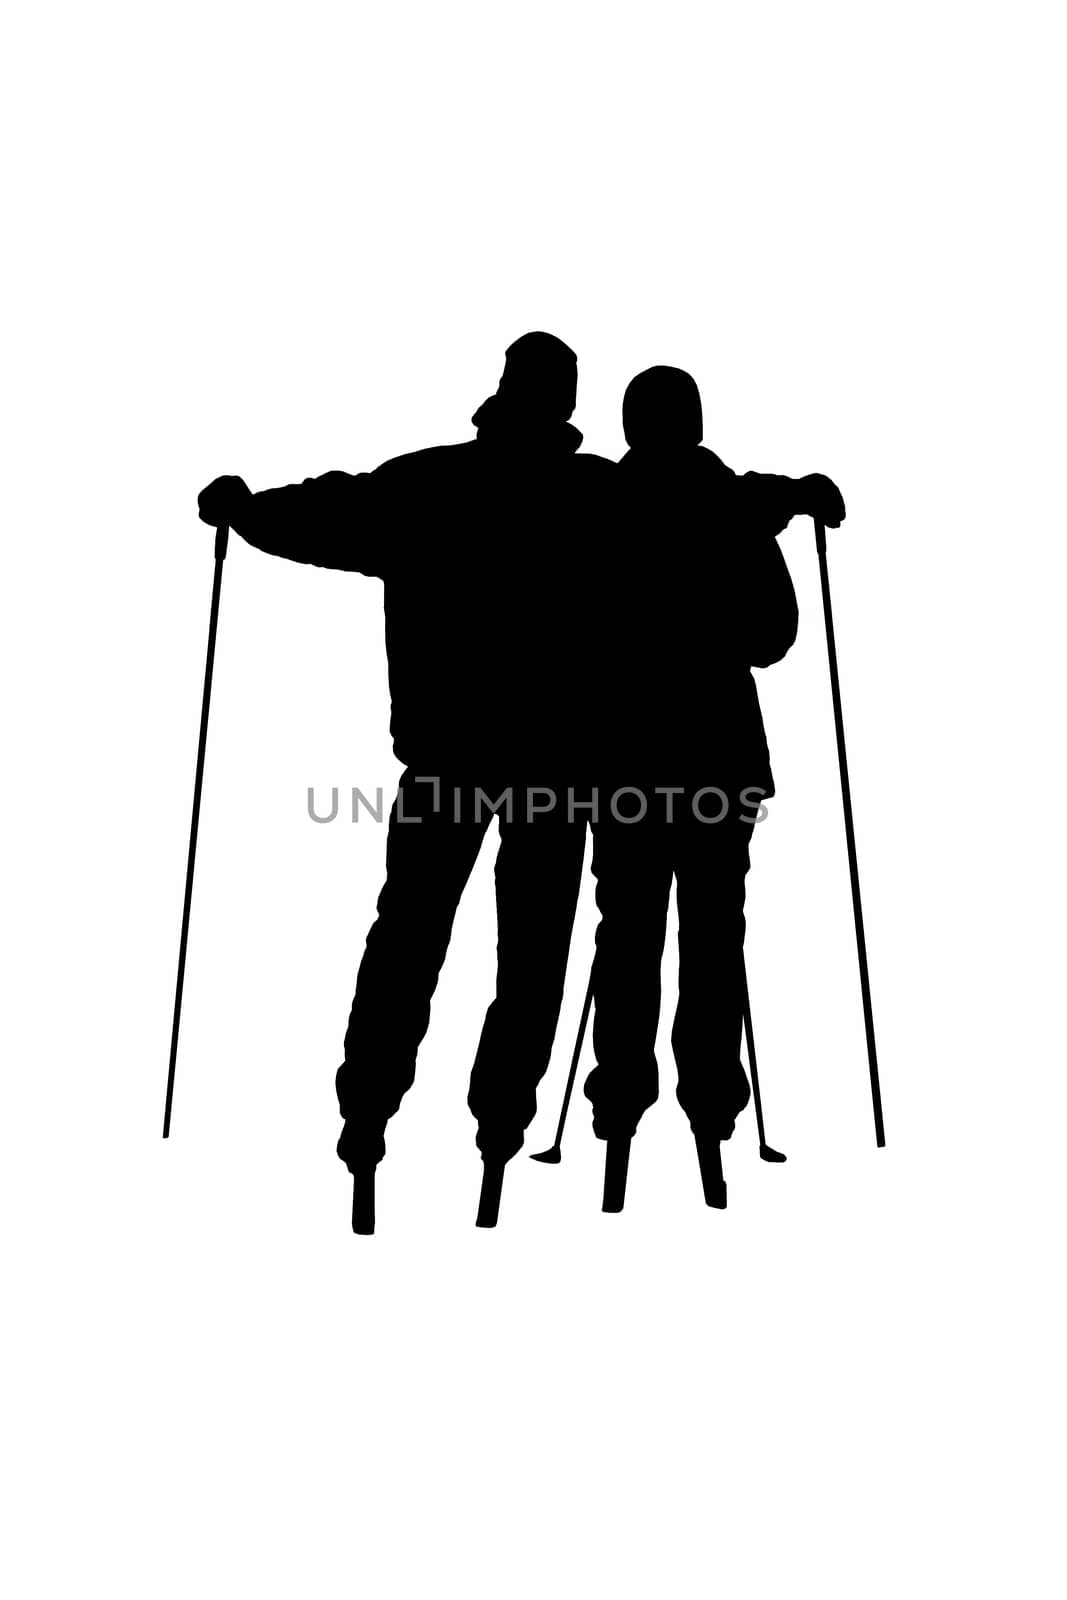 Silhouettes of skiers - men and women, isolated on white background.